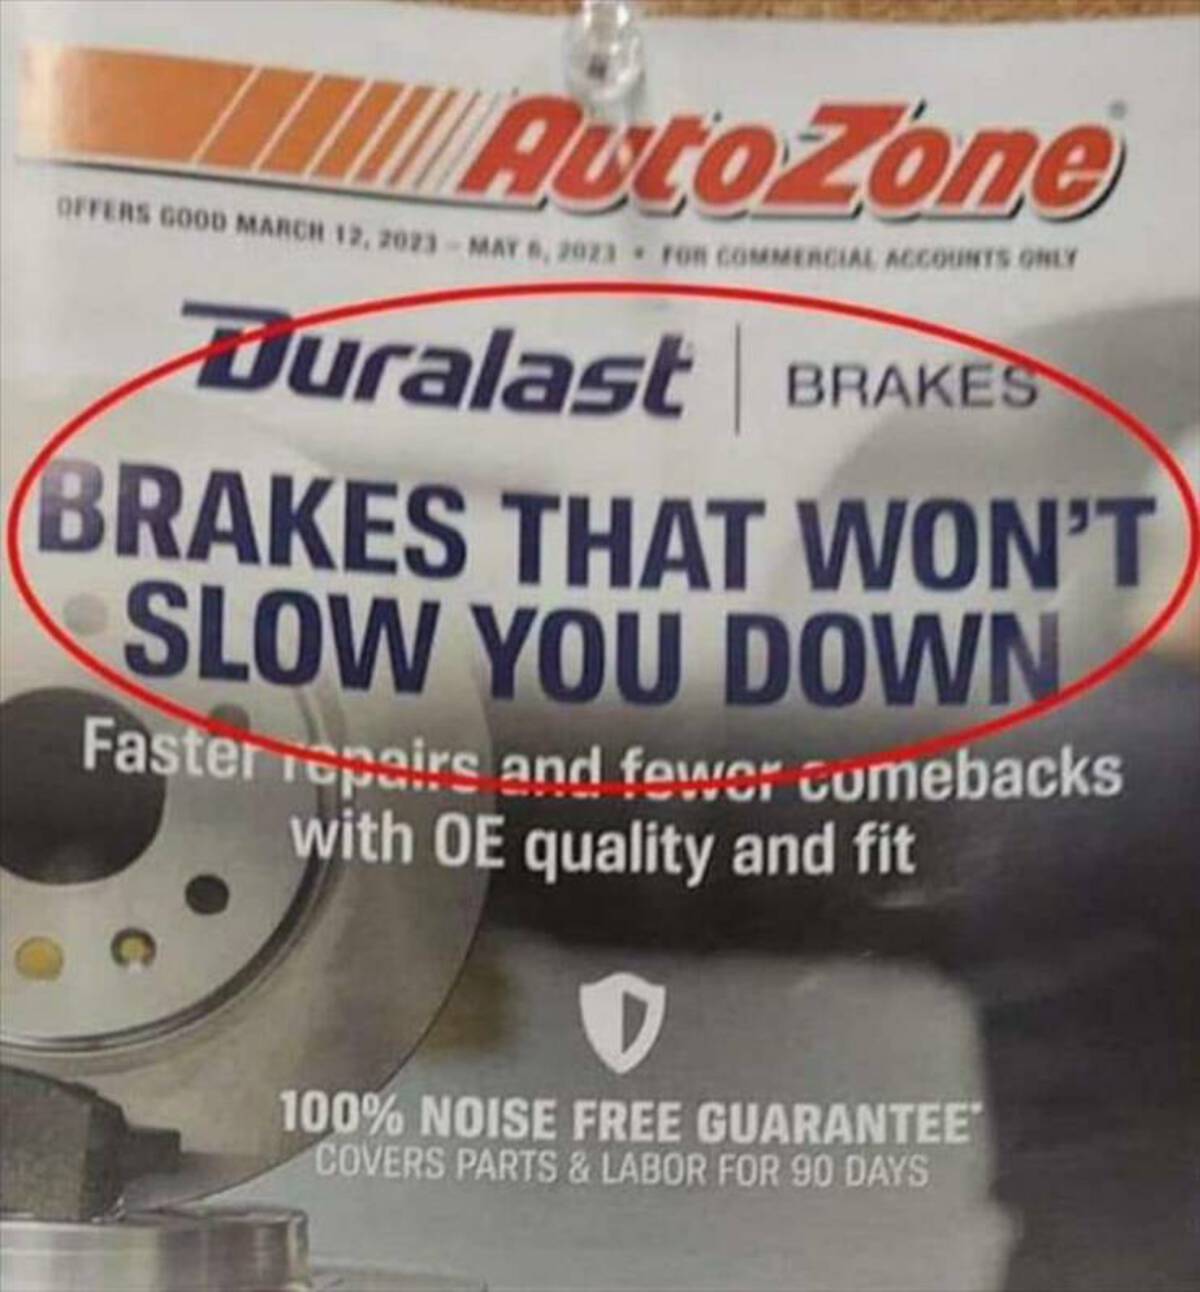 autozone brakes that won t slow you down - AutoZone Offers Good For Commercial Accounts Only Duralast Brakes Brakes That Won'T Slow You Down Faster repairs and fewer comebacks with Oe quality and fit 100% Noise Free Guarantee Covers Parts & Labor For 90 D